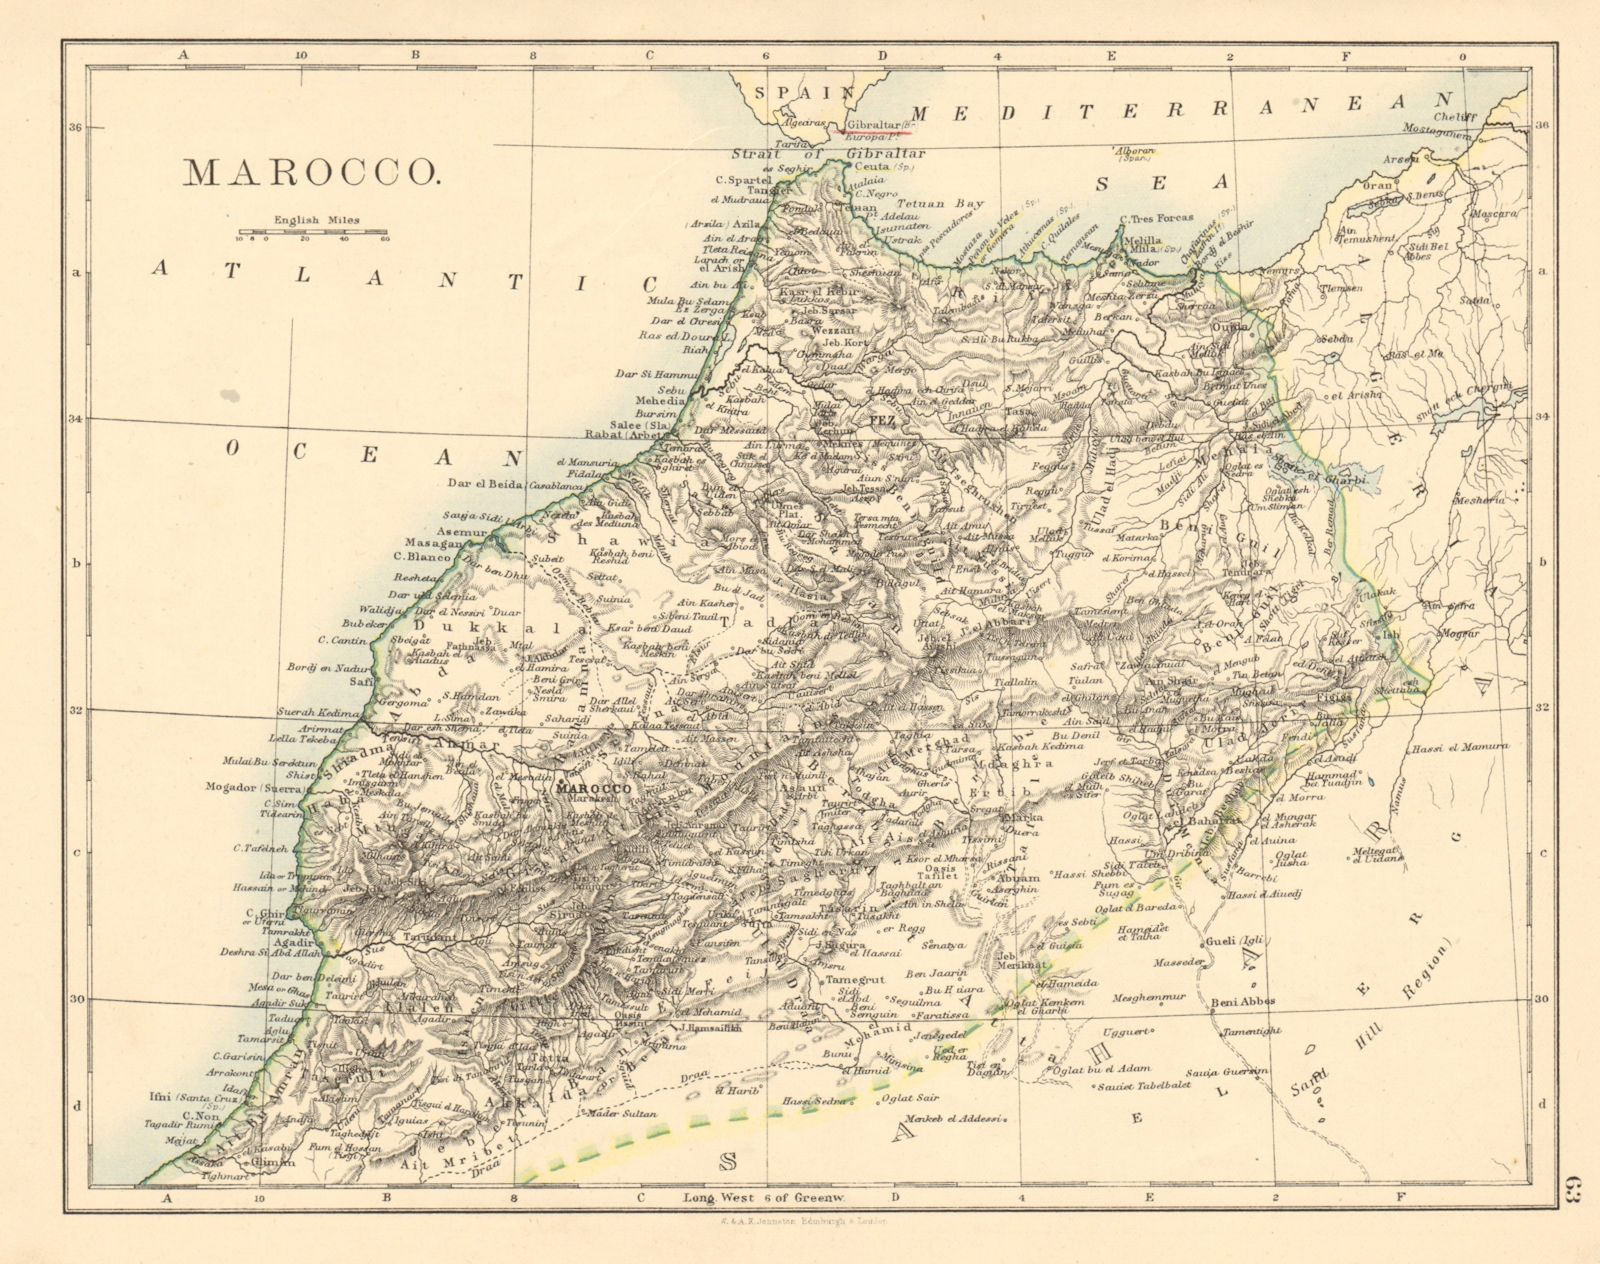 MOROCCO showing Atlas mountains rivers towns Marrakech JOHNSTON 1892 old map